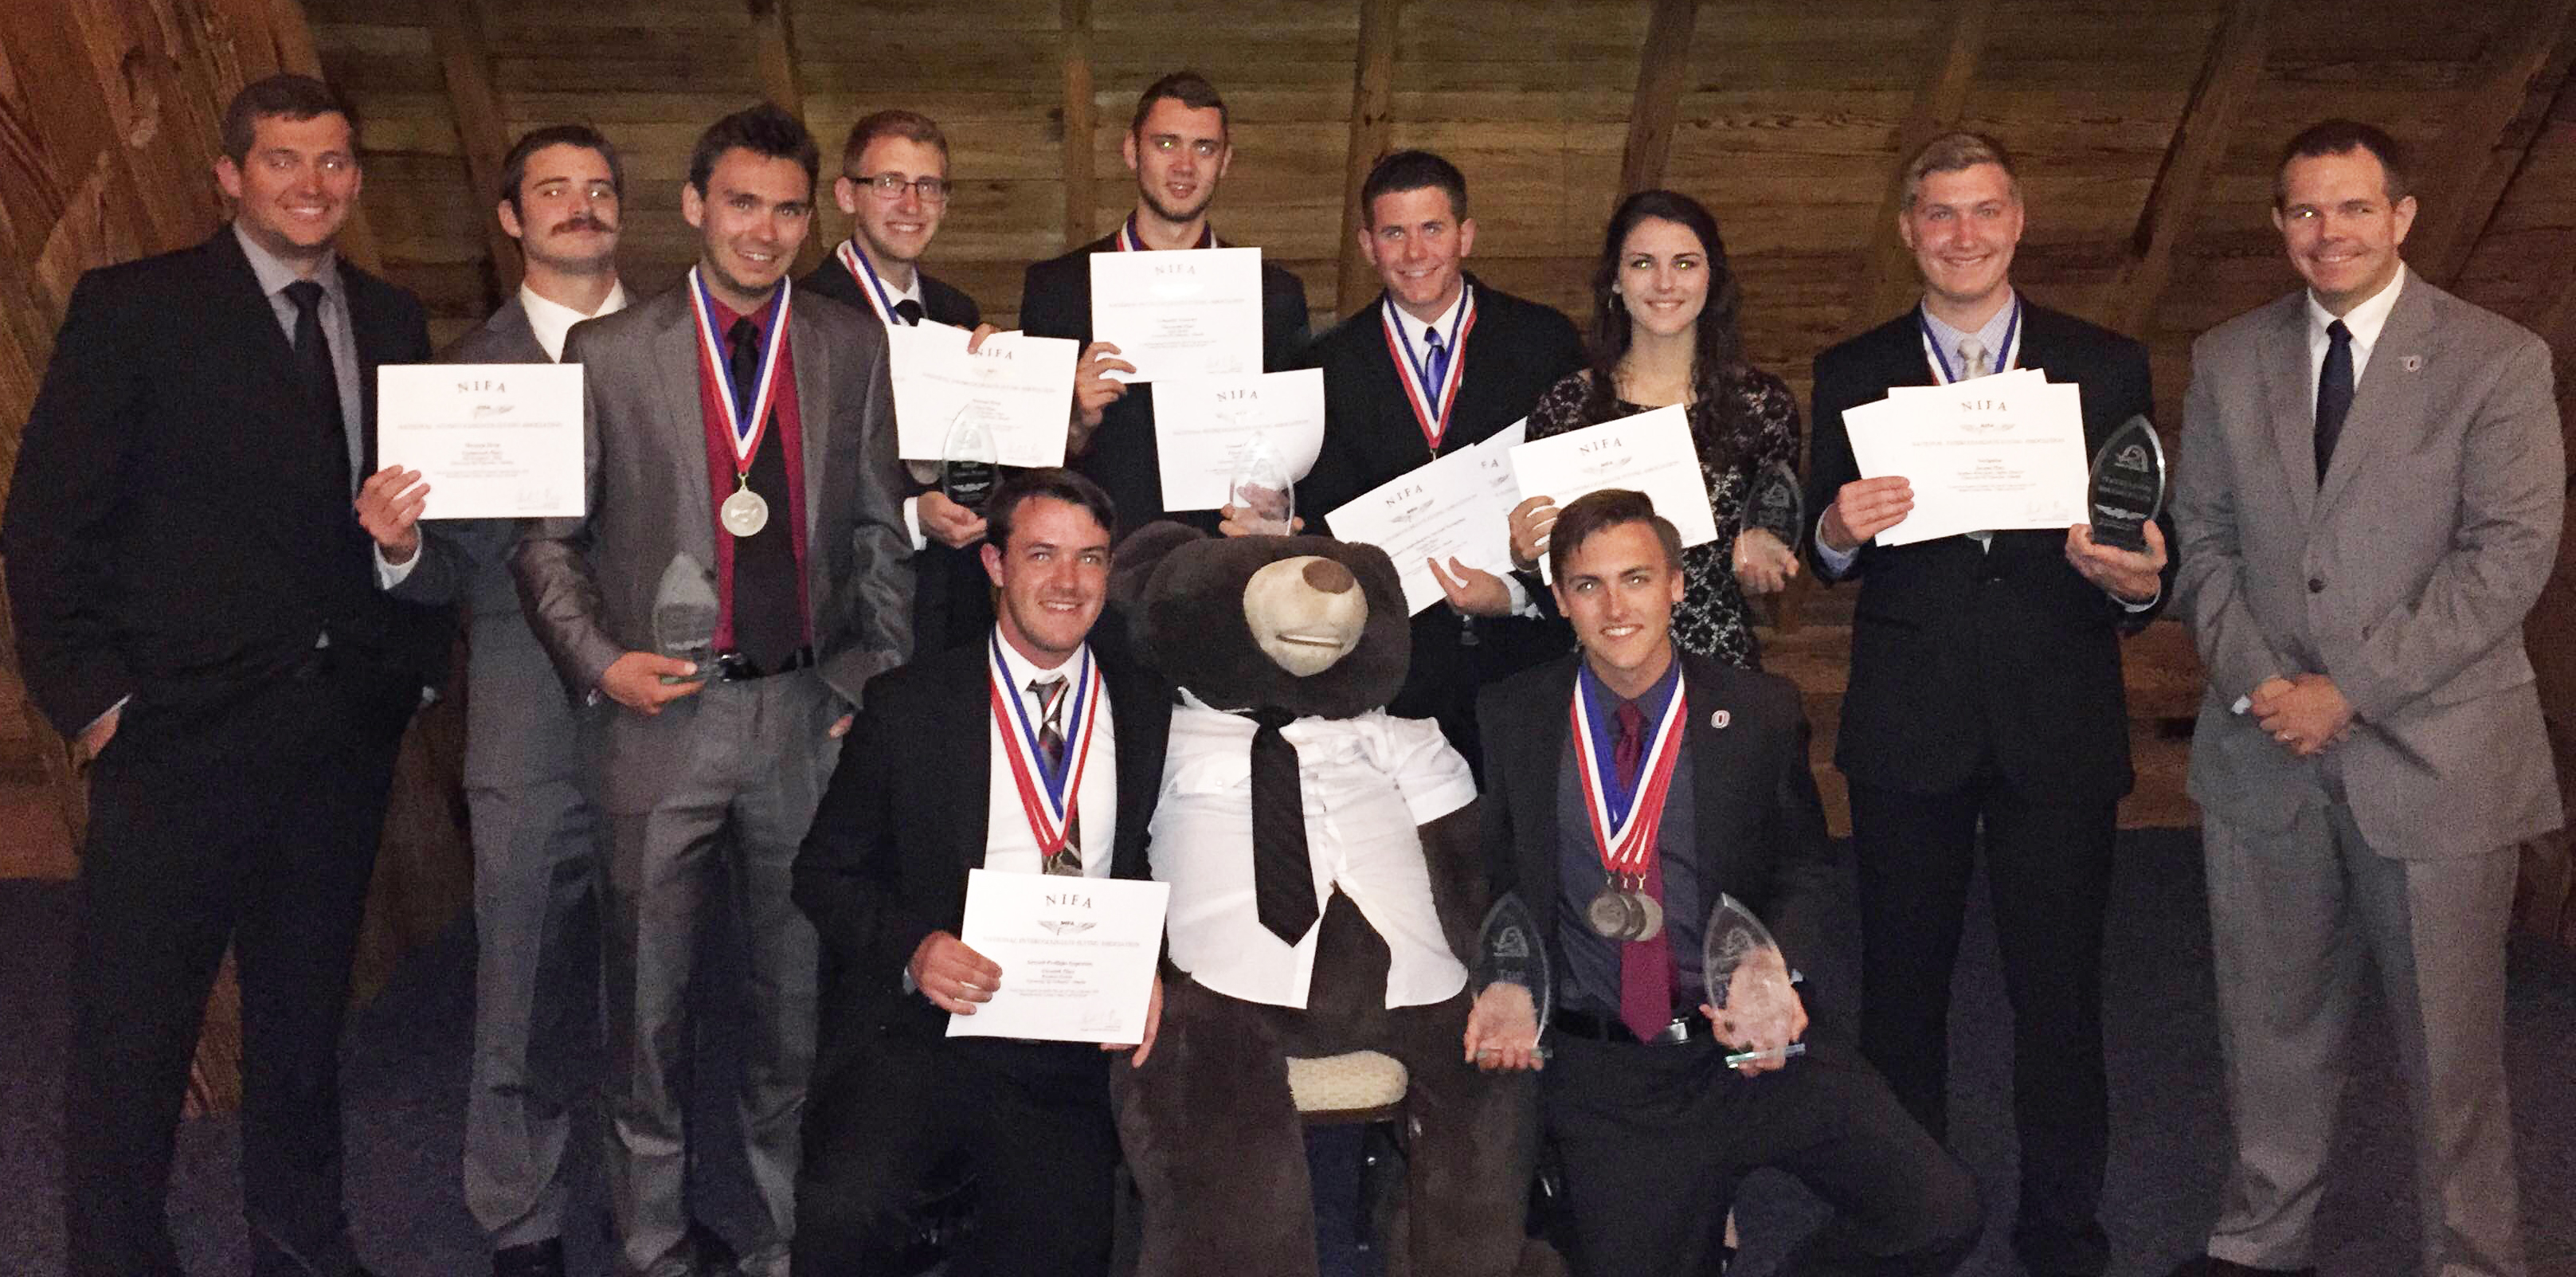 The Flying Mavs pose with their awards and unofficial mascot after the competition's awards banquet.